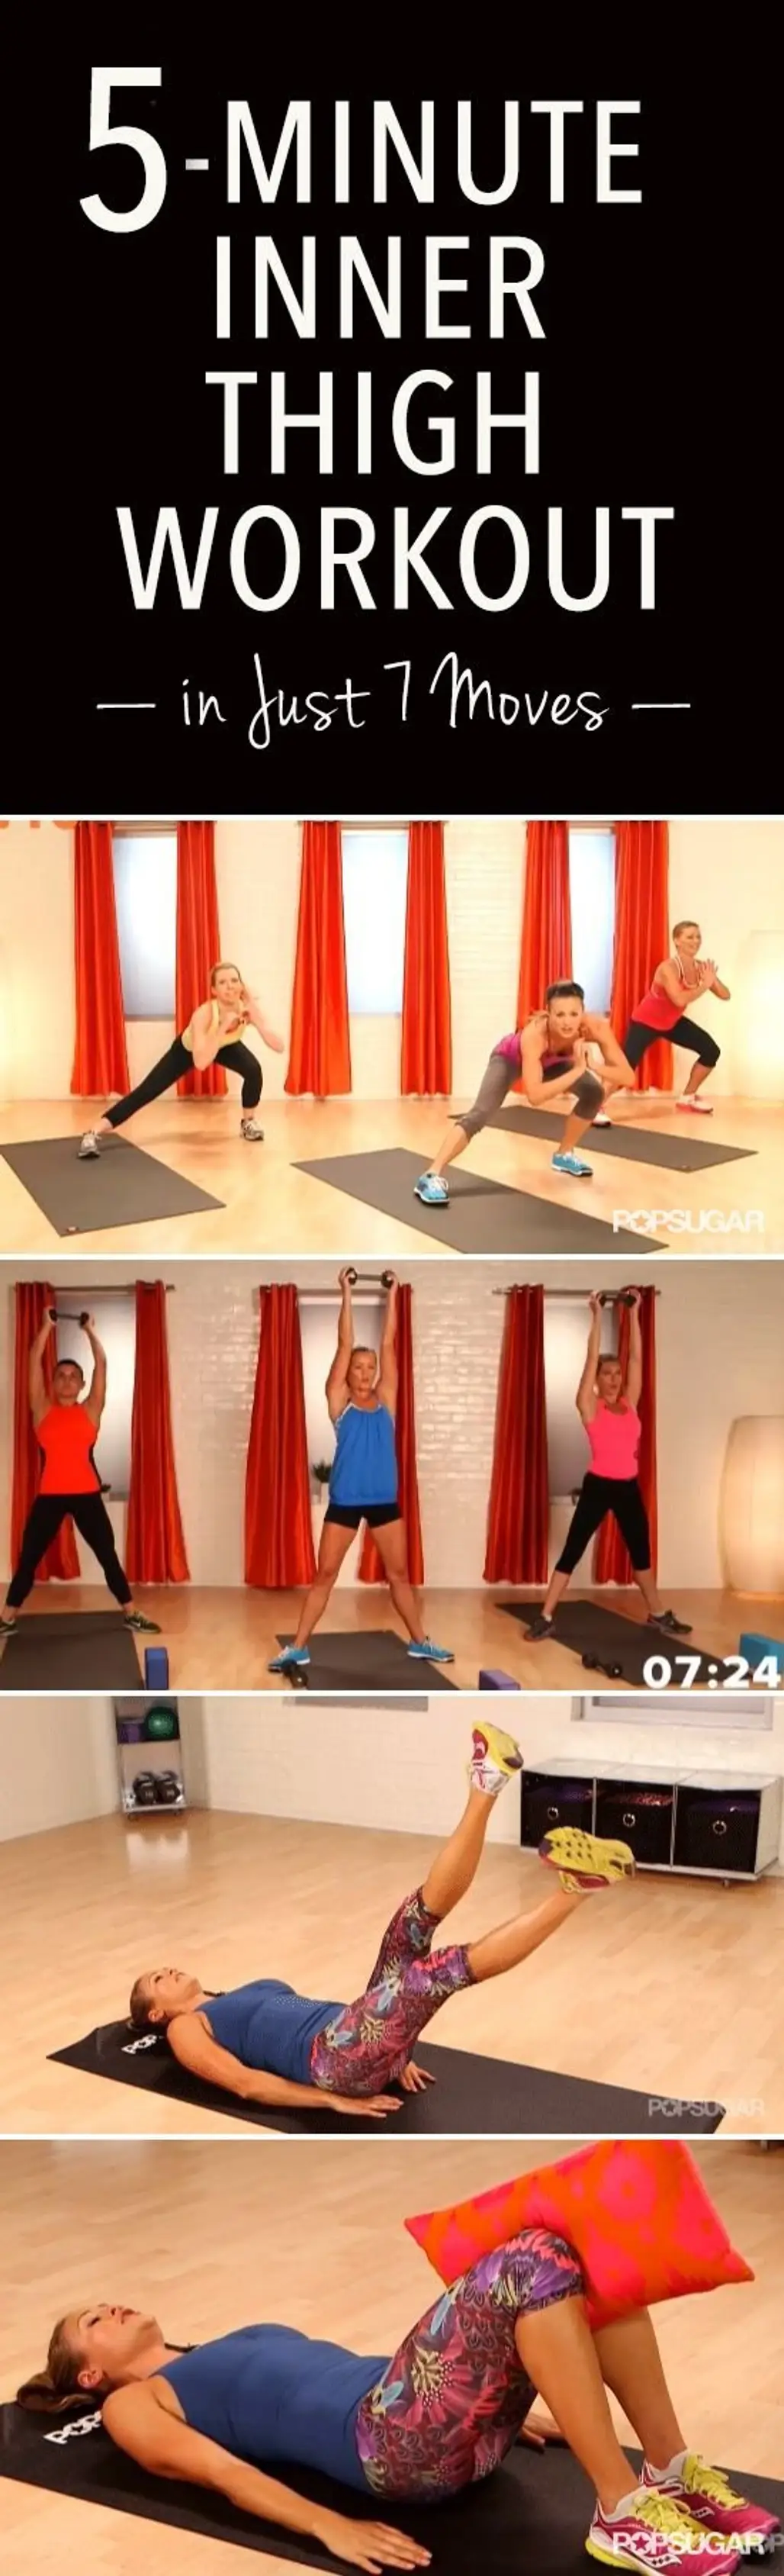 5-Minute Workout for Slimmer Inner Thighs